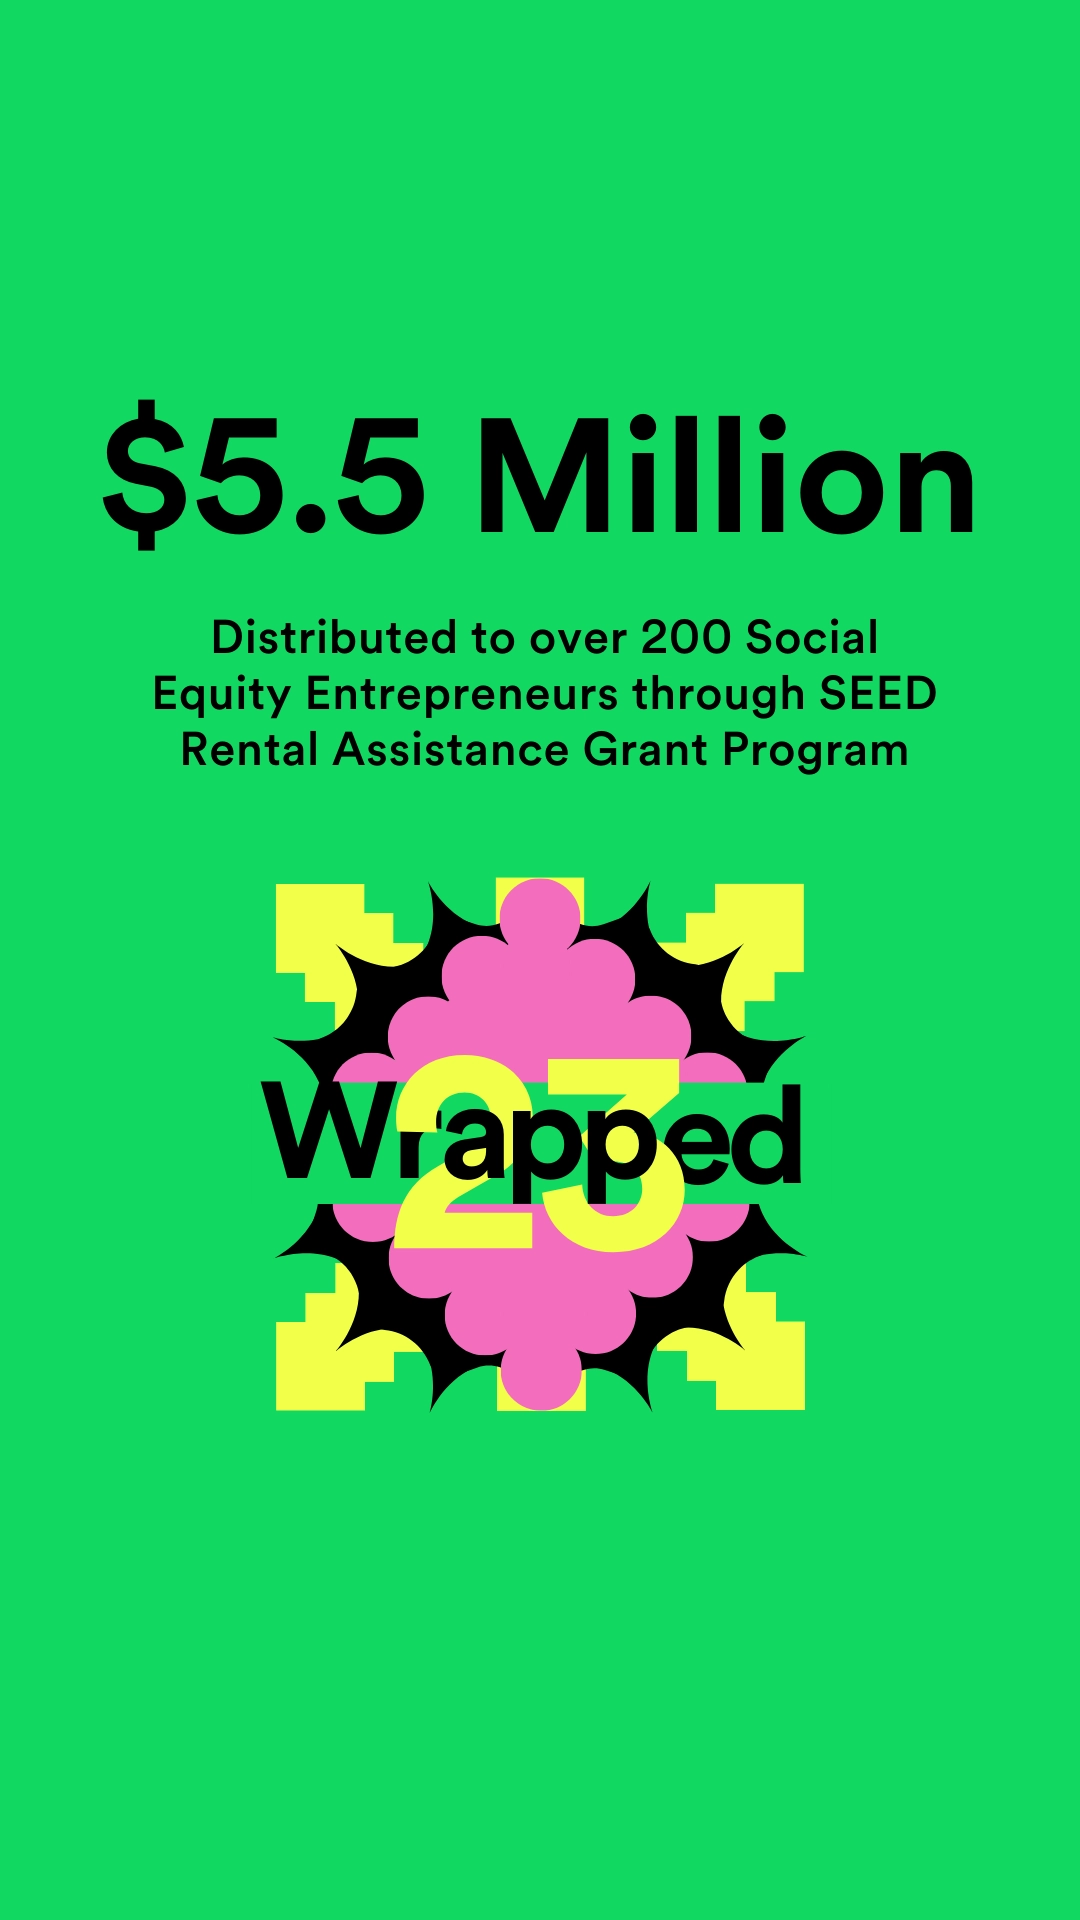 $5.5 million distributed to over 200 Social Equity Entrepreneurs through SEED Rental Assistance Grant Program.